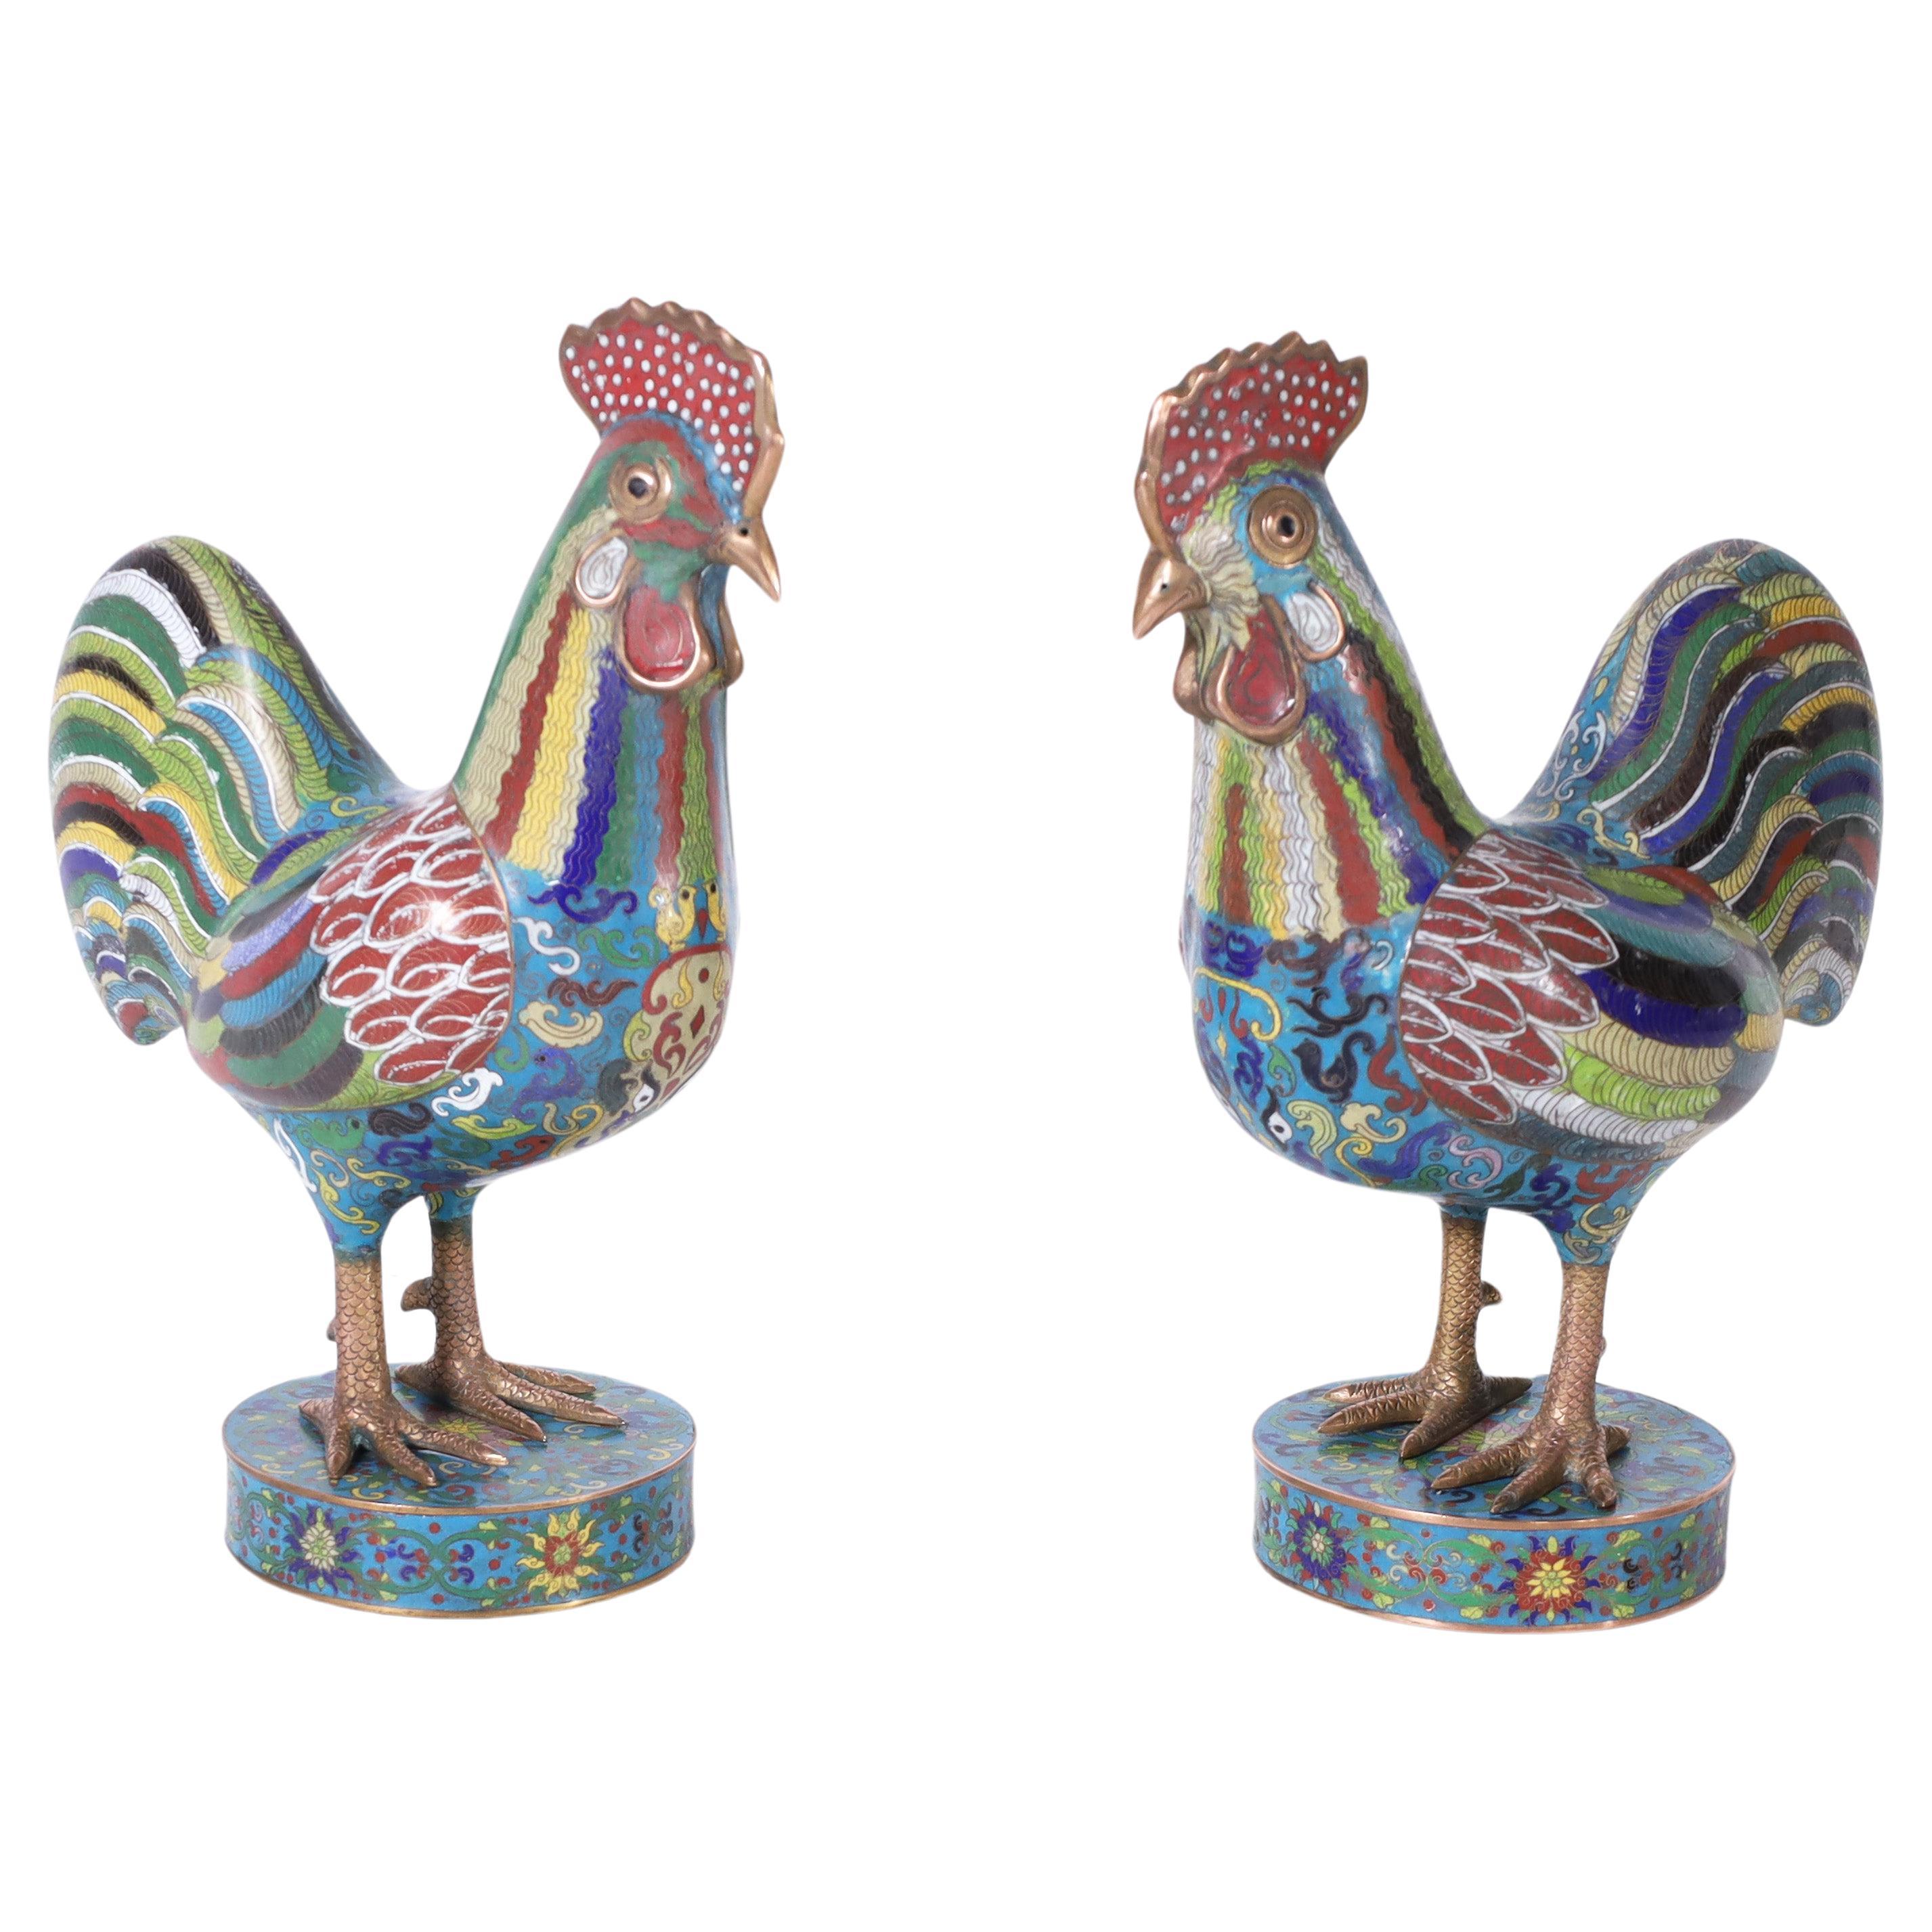 Pair of Antique Chinese Cloisonne Roosters For Sale